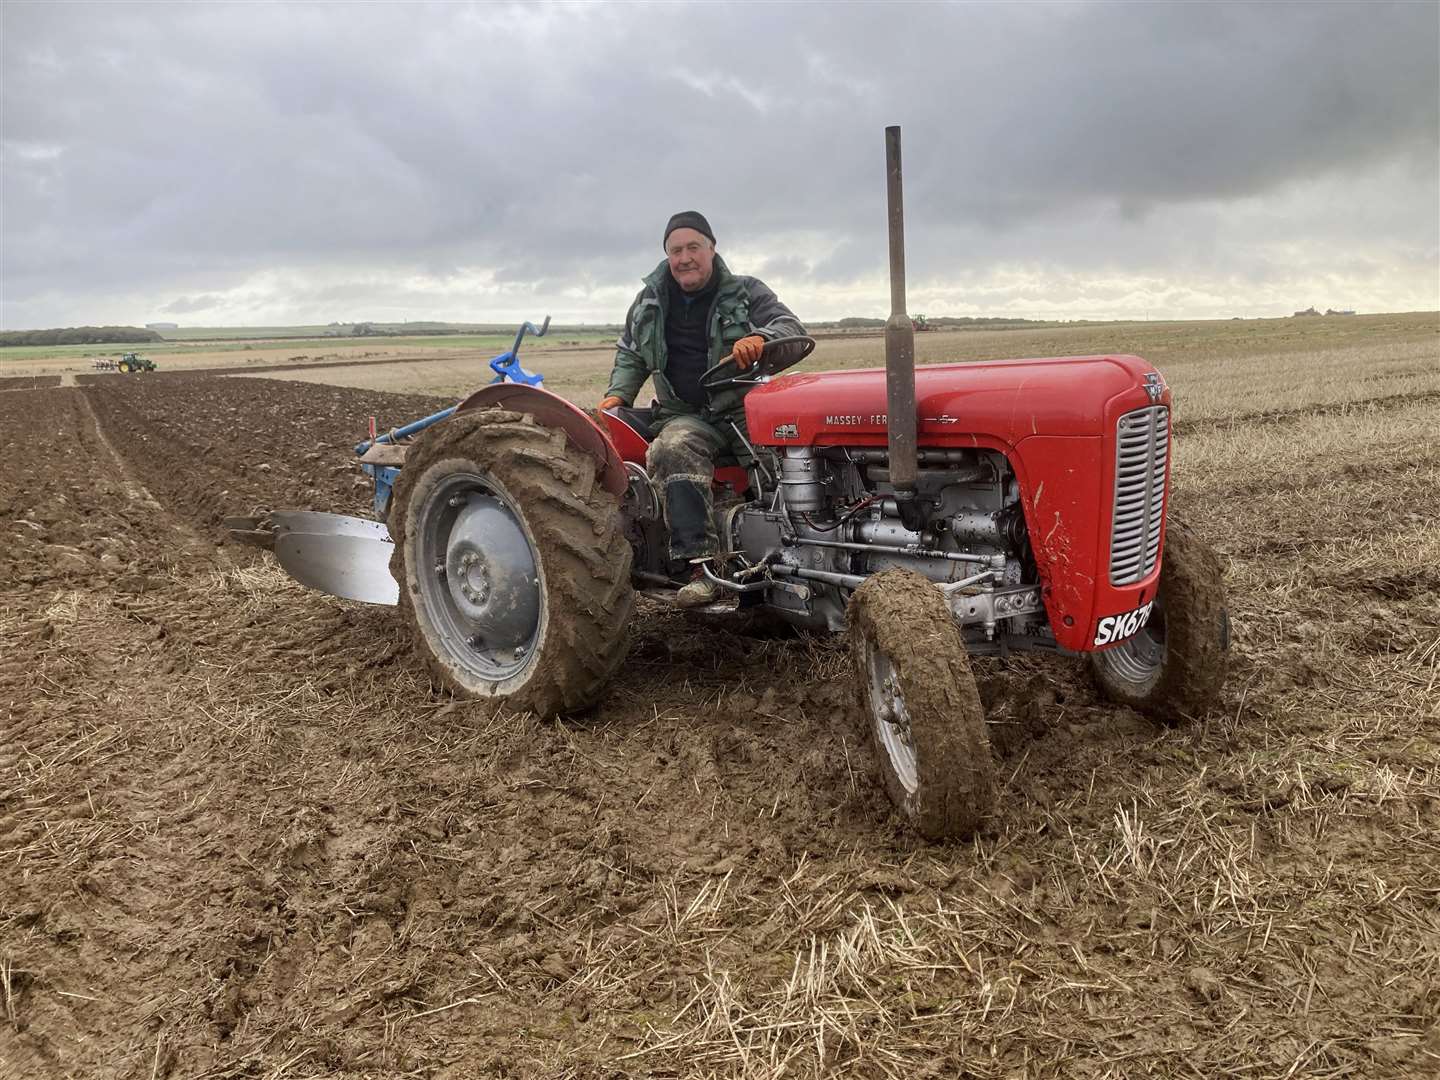 Brian Polson was among the prize-winners in Latheron Parish Ploughing Association’s 37th annual ploughing match.